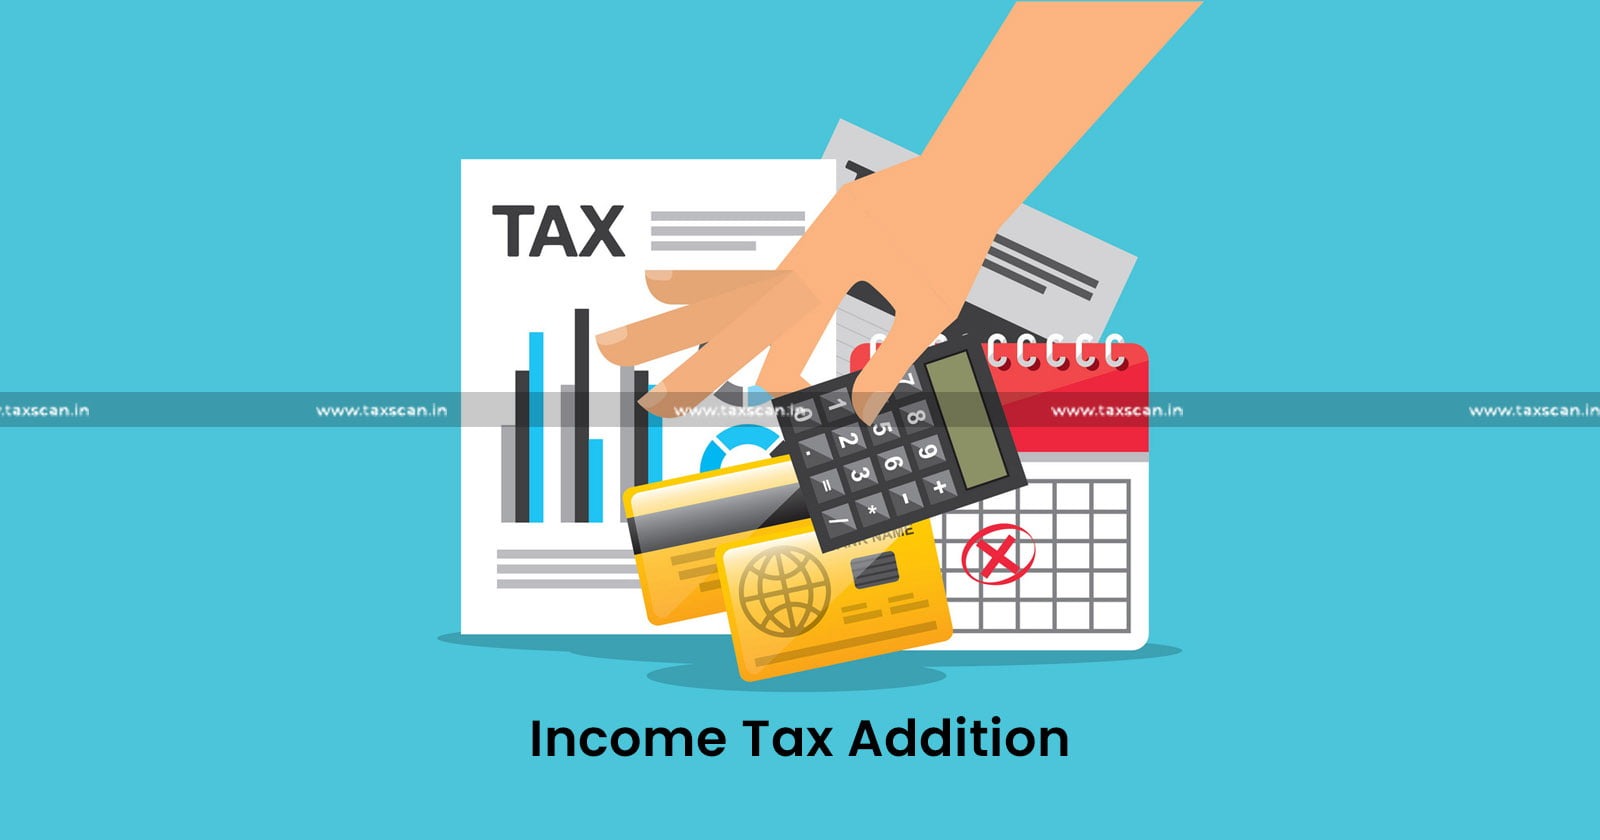 ITAT - Income Tax - Income Tax Addition - Taxpayer - ITAT mumbai - Section 68 of the Income Tax Act - taxscan